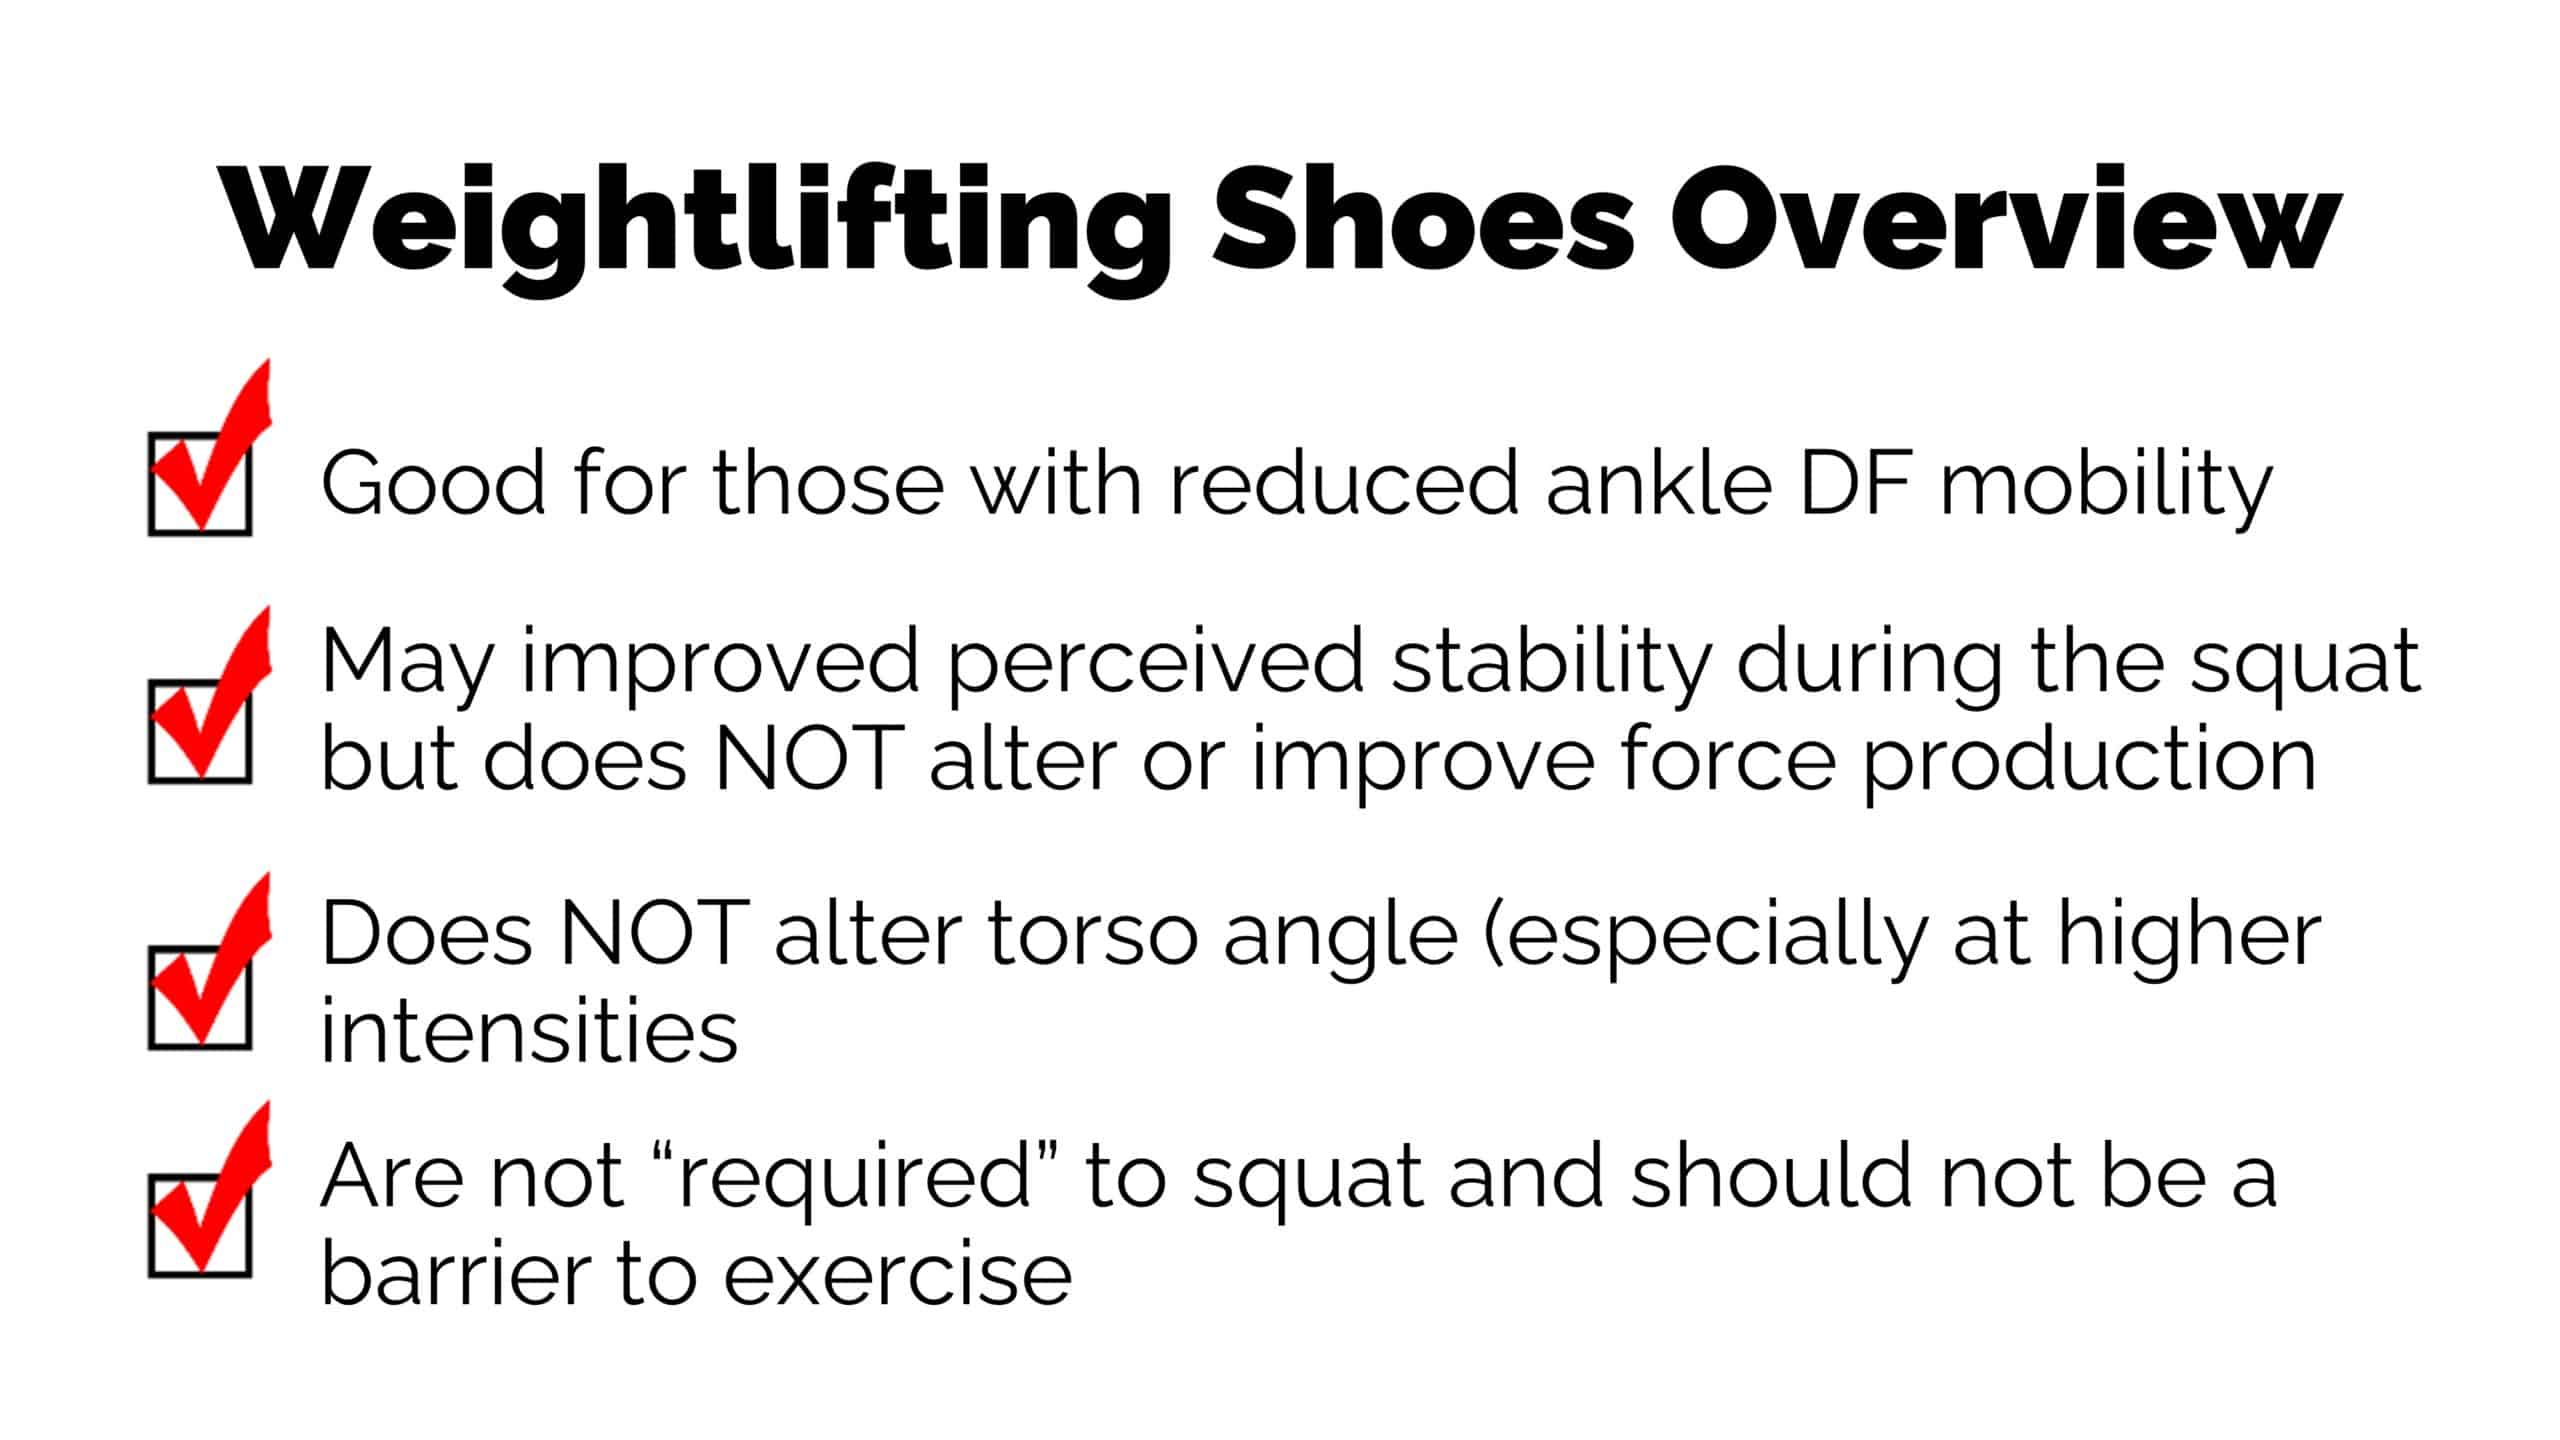 weightlifting shoes overview